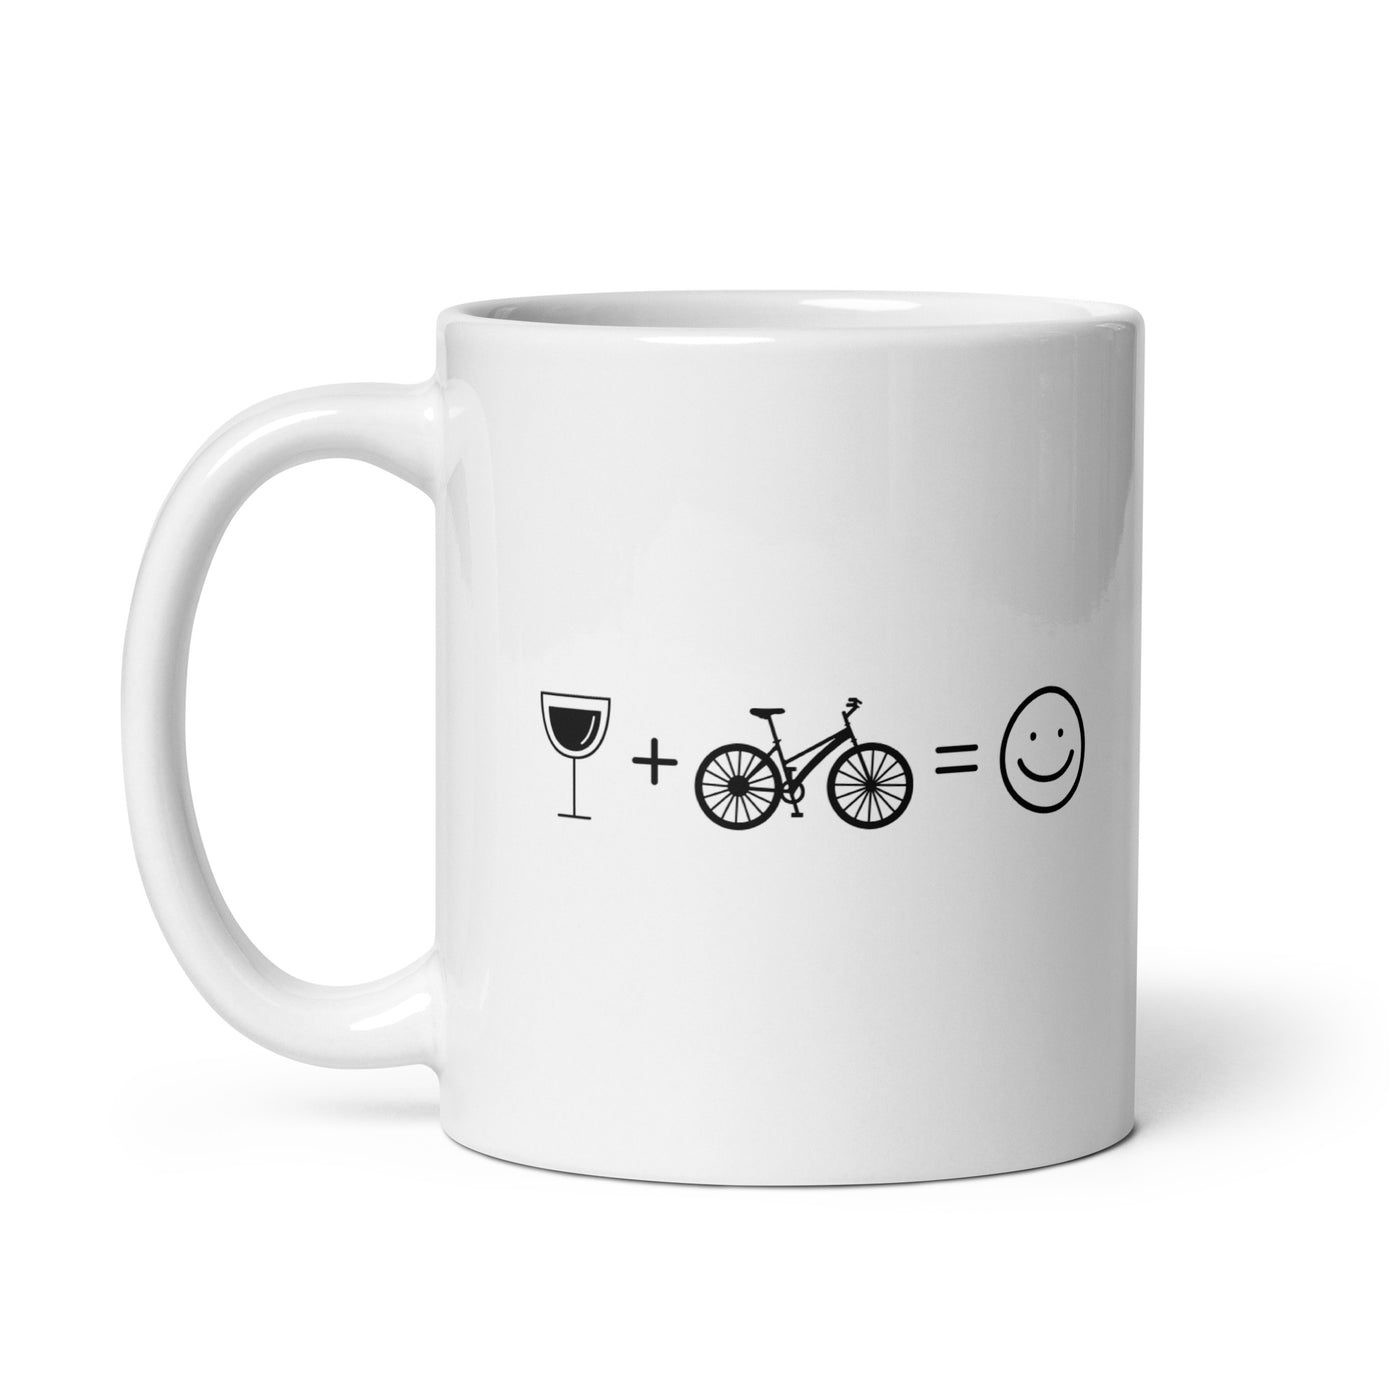 Wine Smile Face And Cycling - Tasse fahrrad 11oz